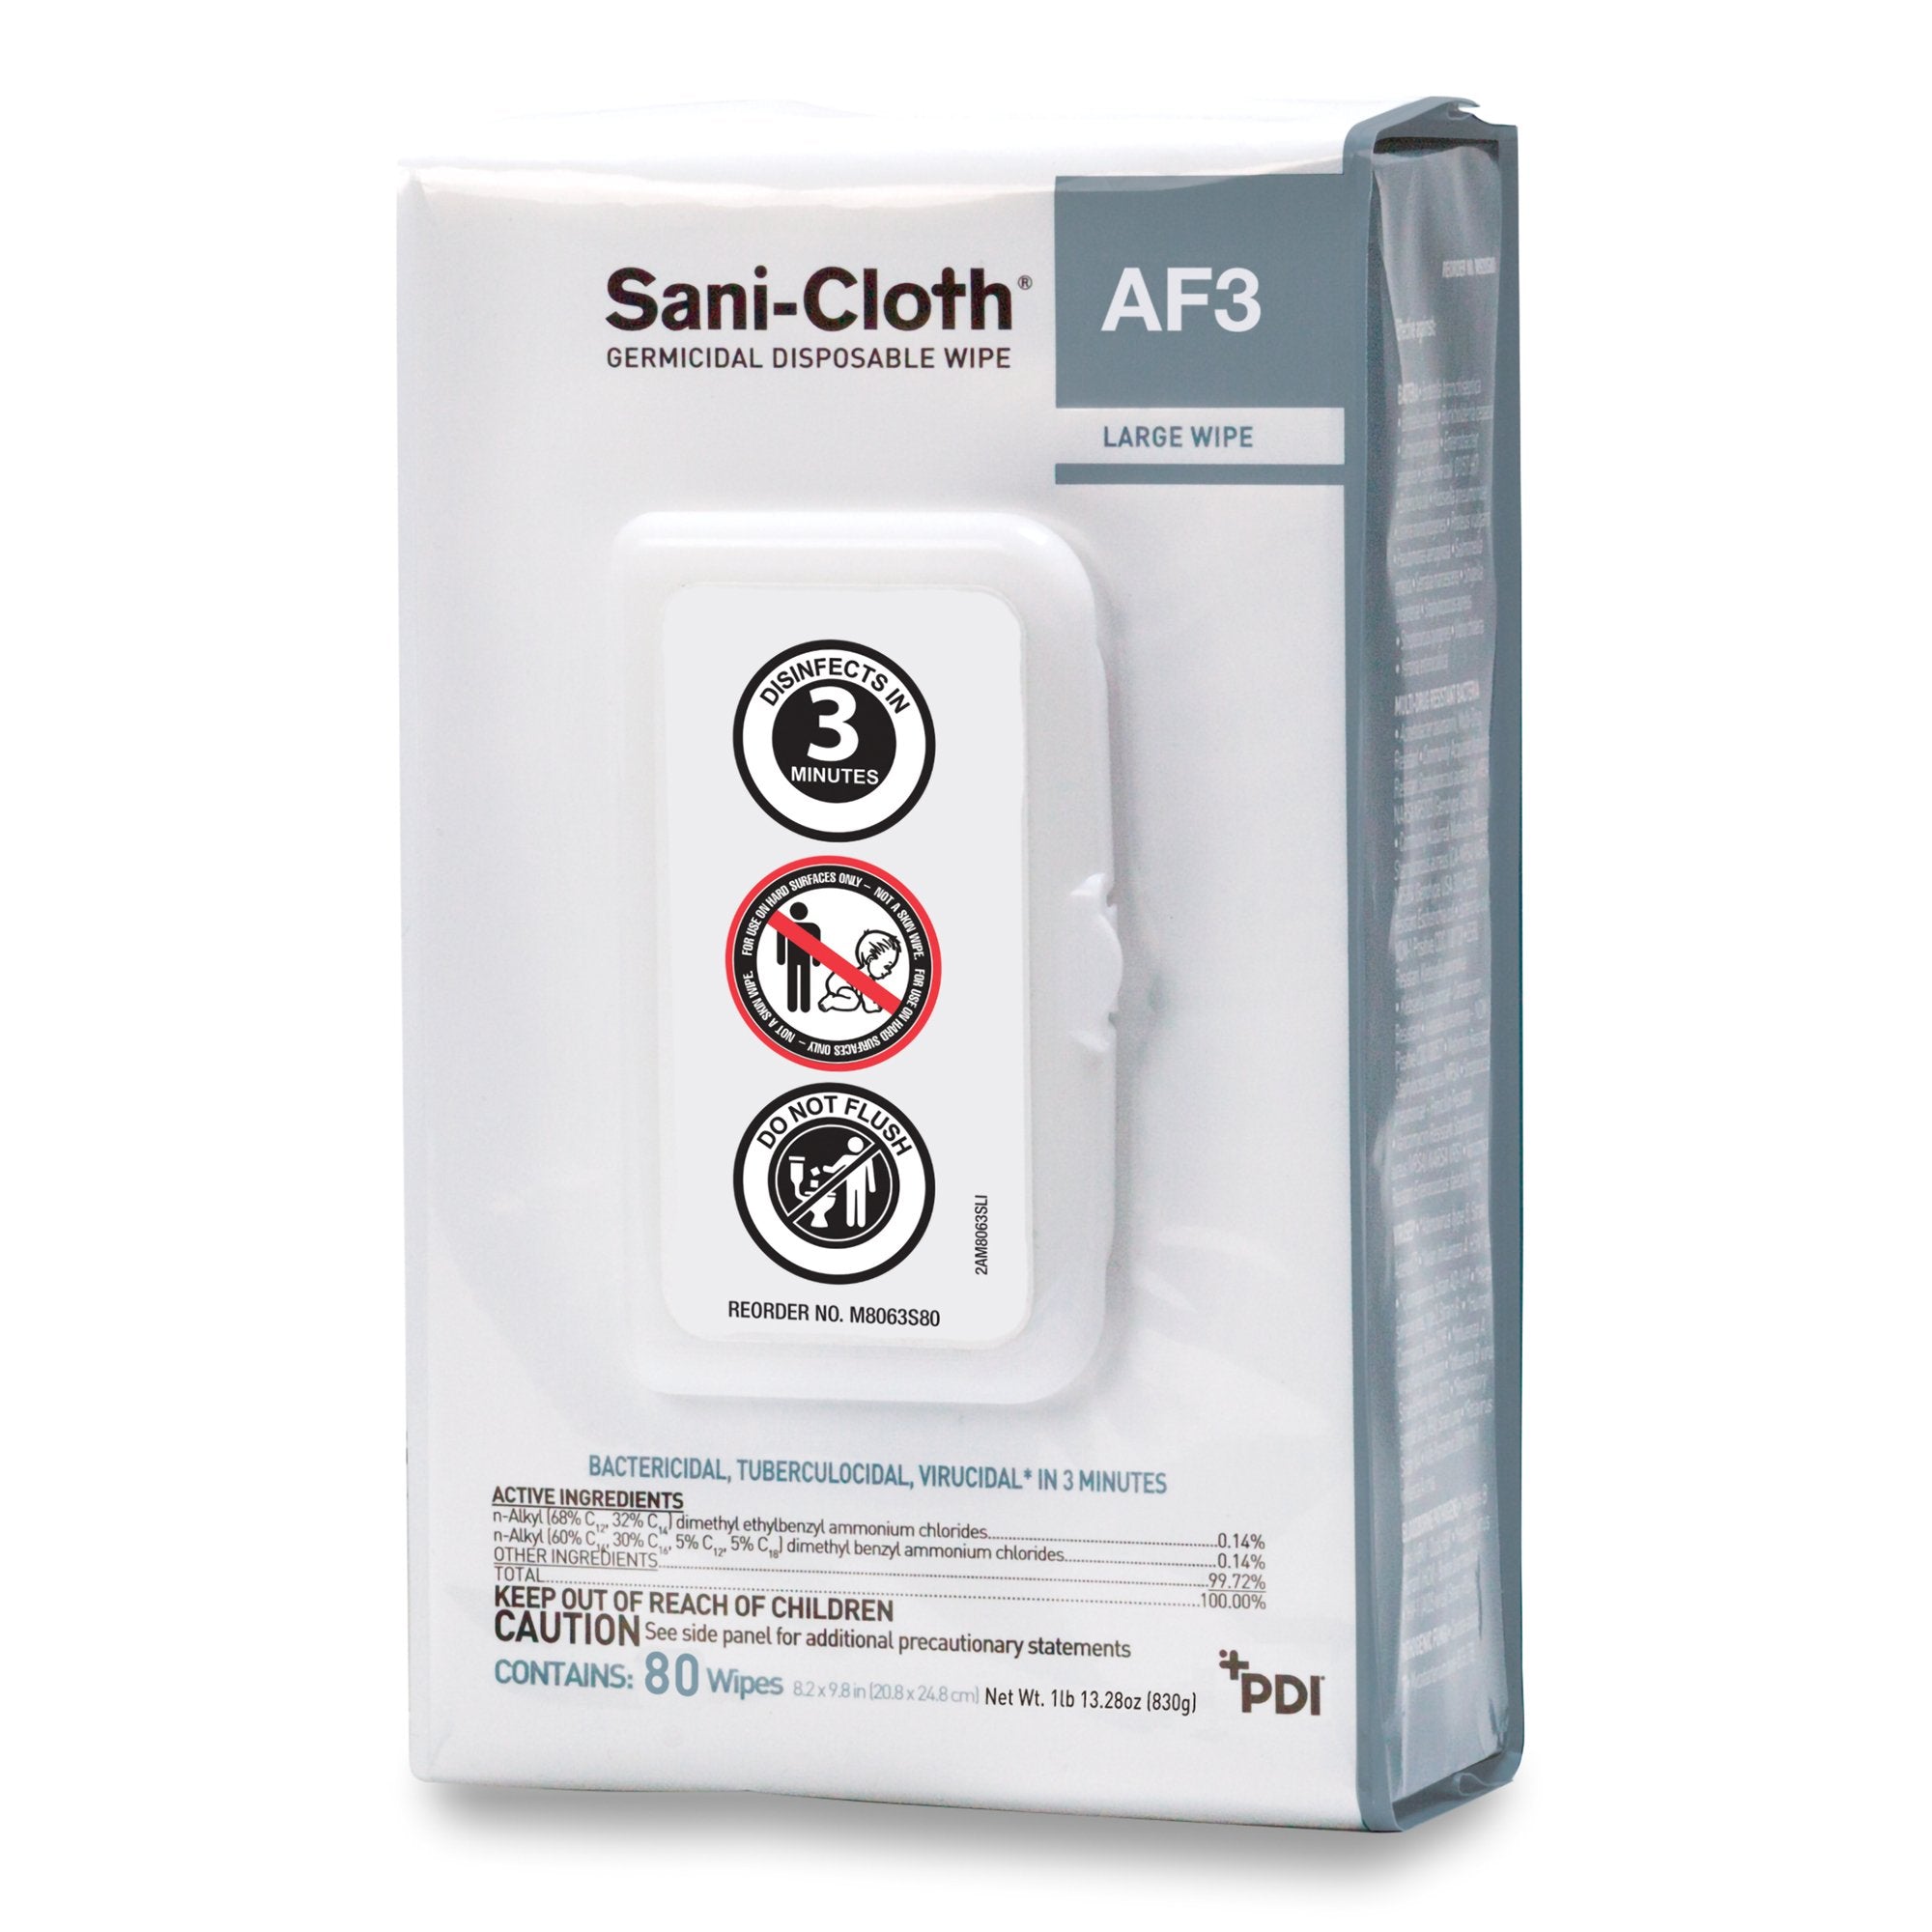 Sani-Cloth® AF3 Surface Disinfectant Cleaner Premoistened Germicidal Manual Pull Wipe 80 Count Hard Case Unscented NonSterile